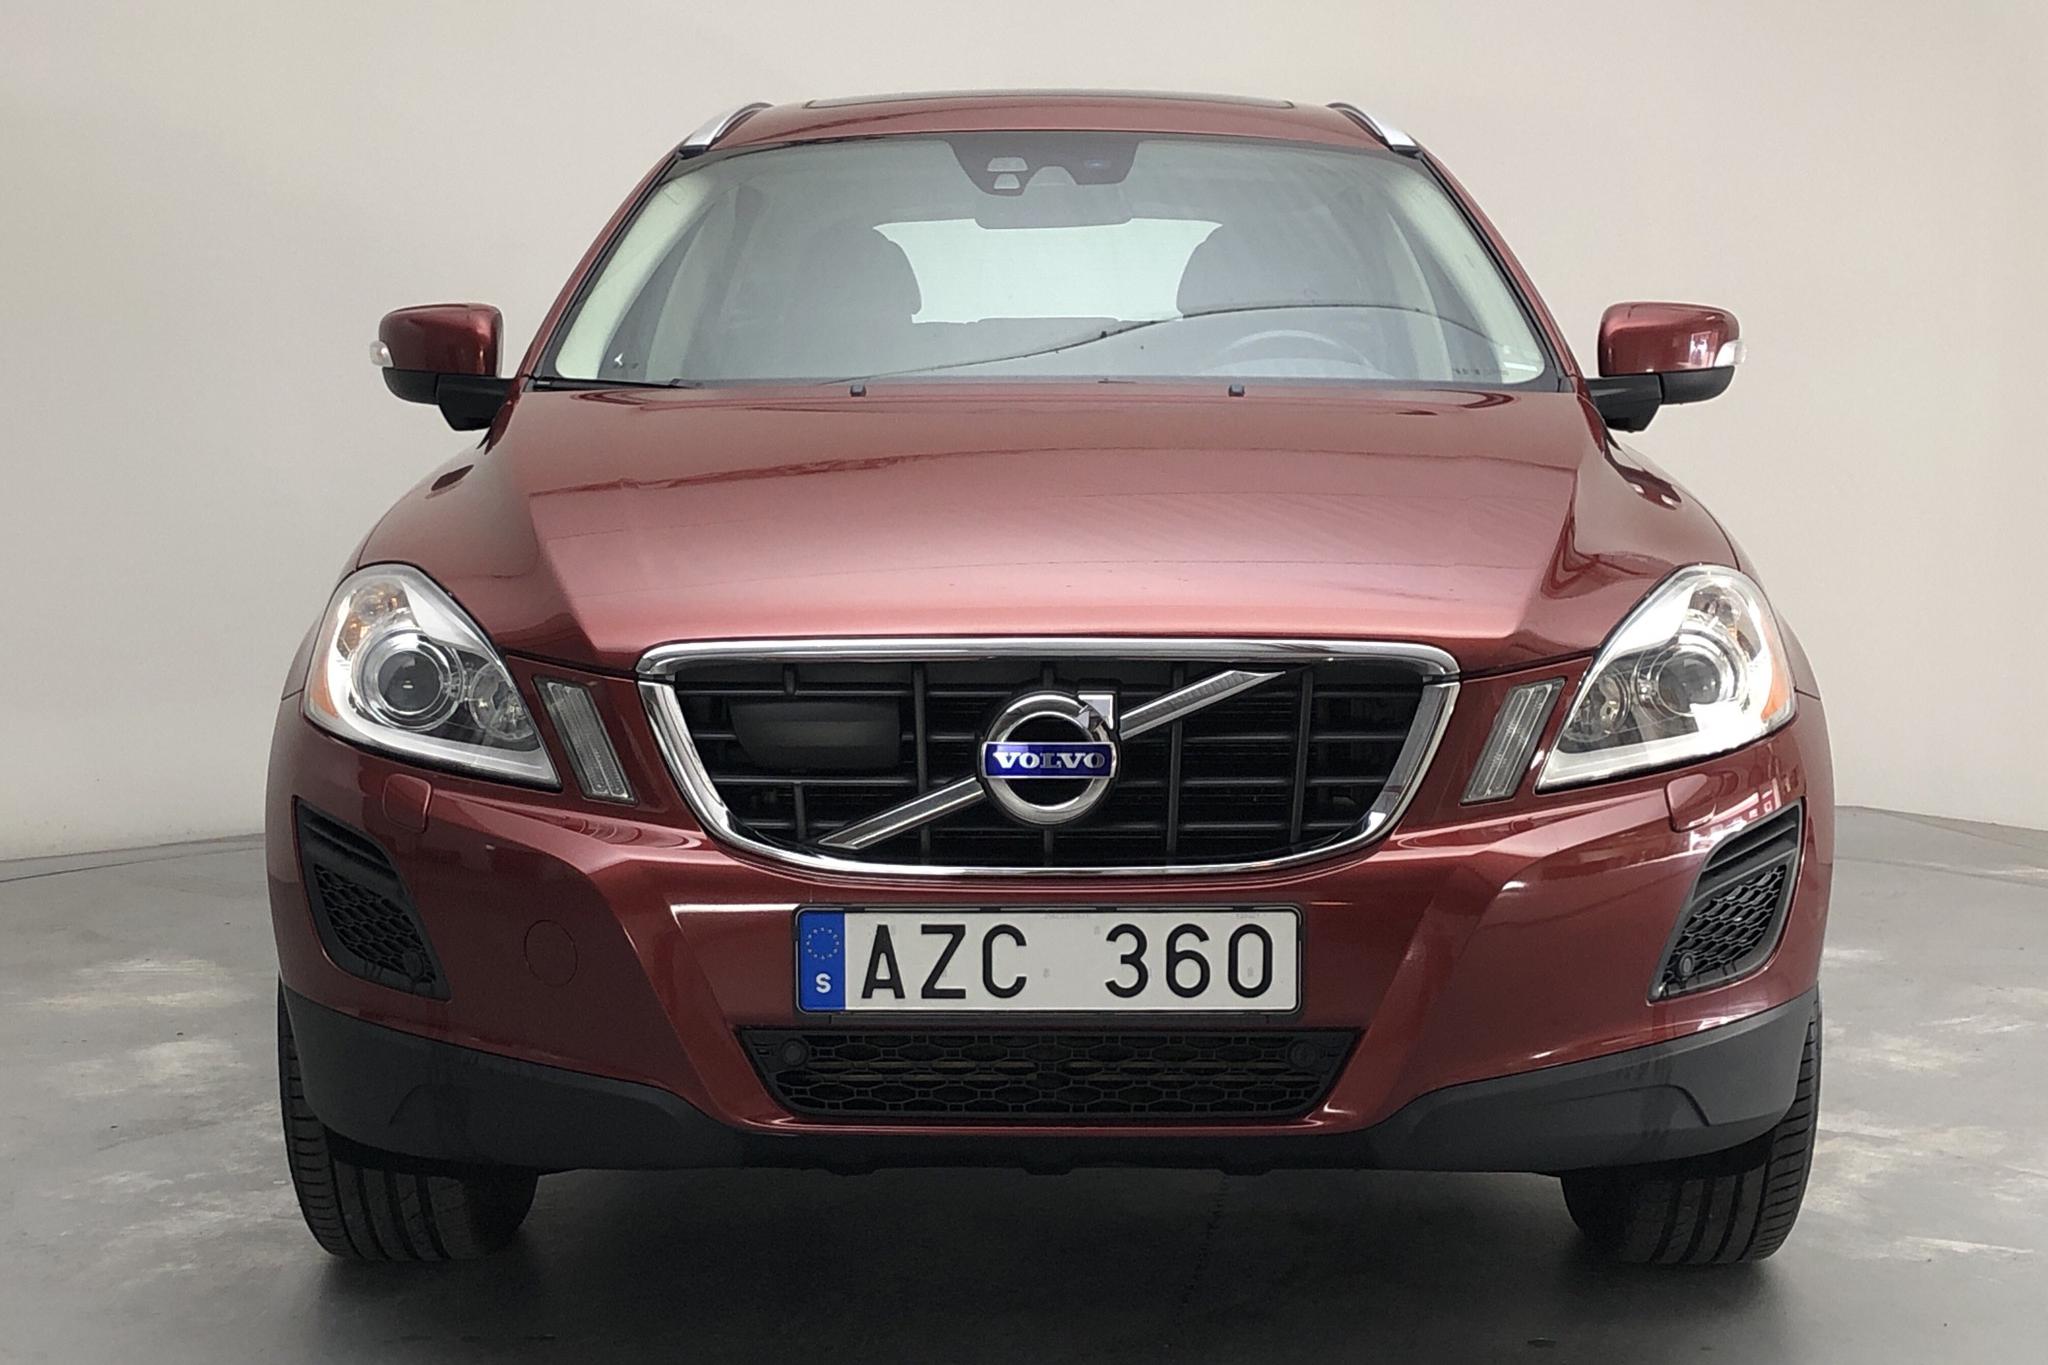 Volvo XC60 D5 AWD (215hk) - 207 920 km - Automatic - red - 2012